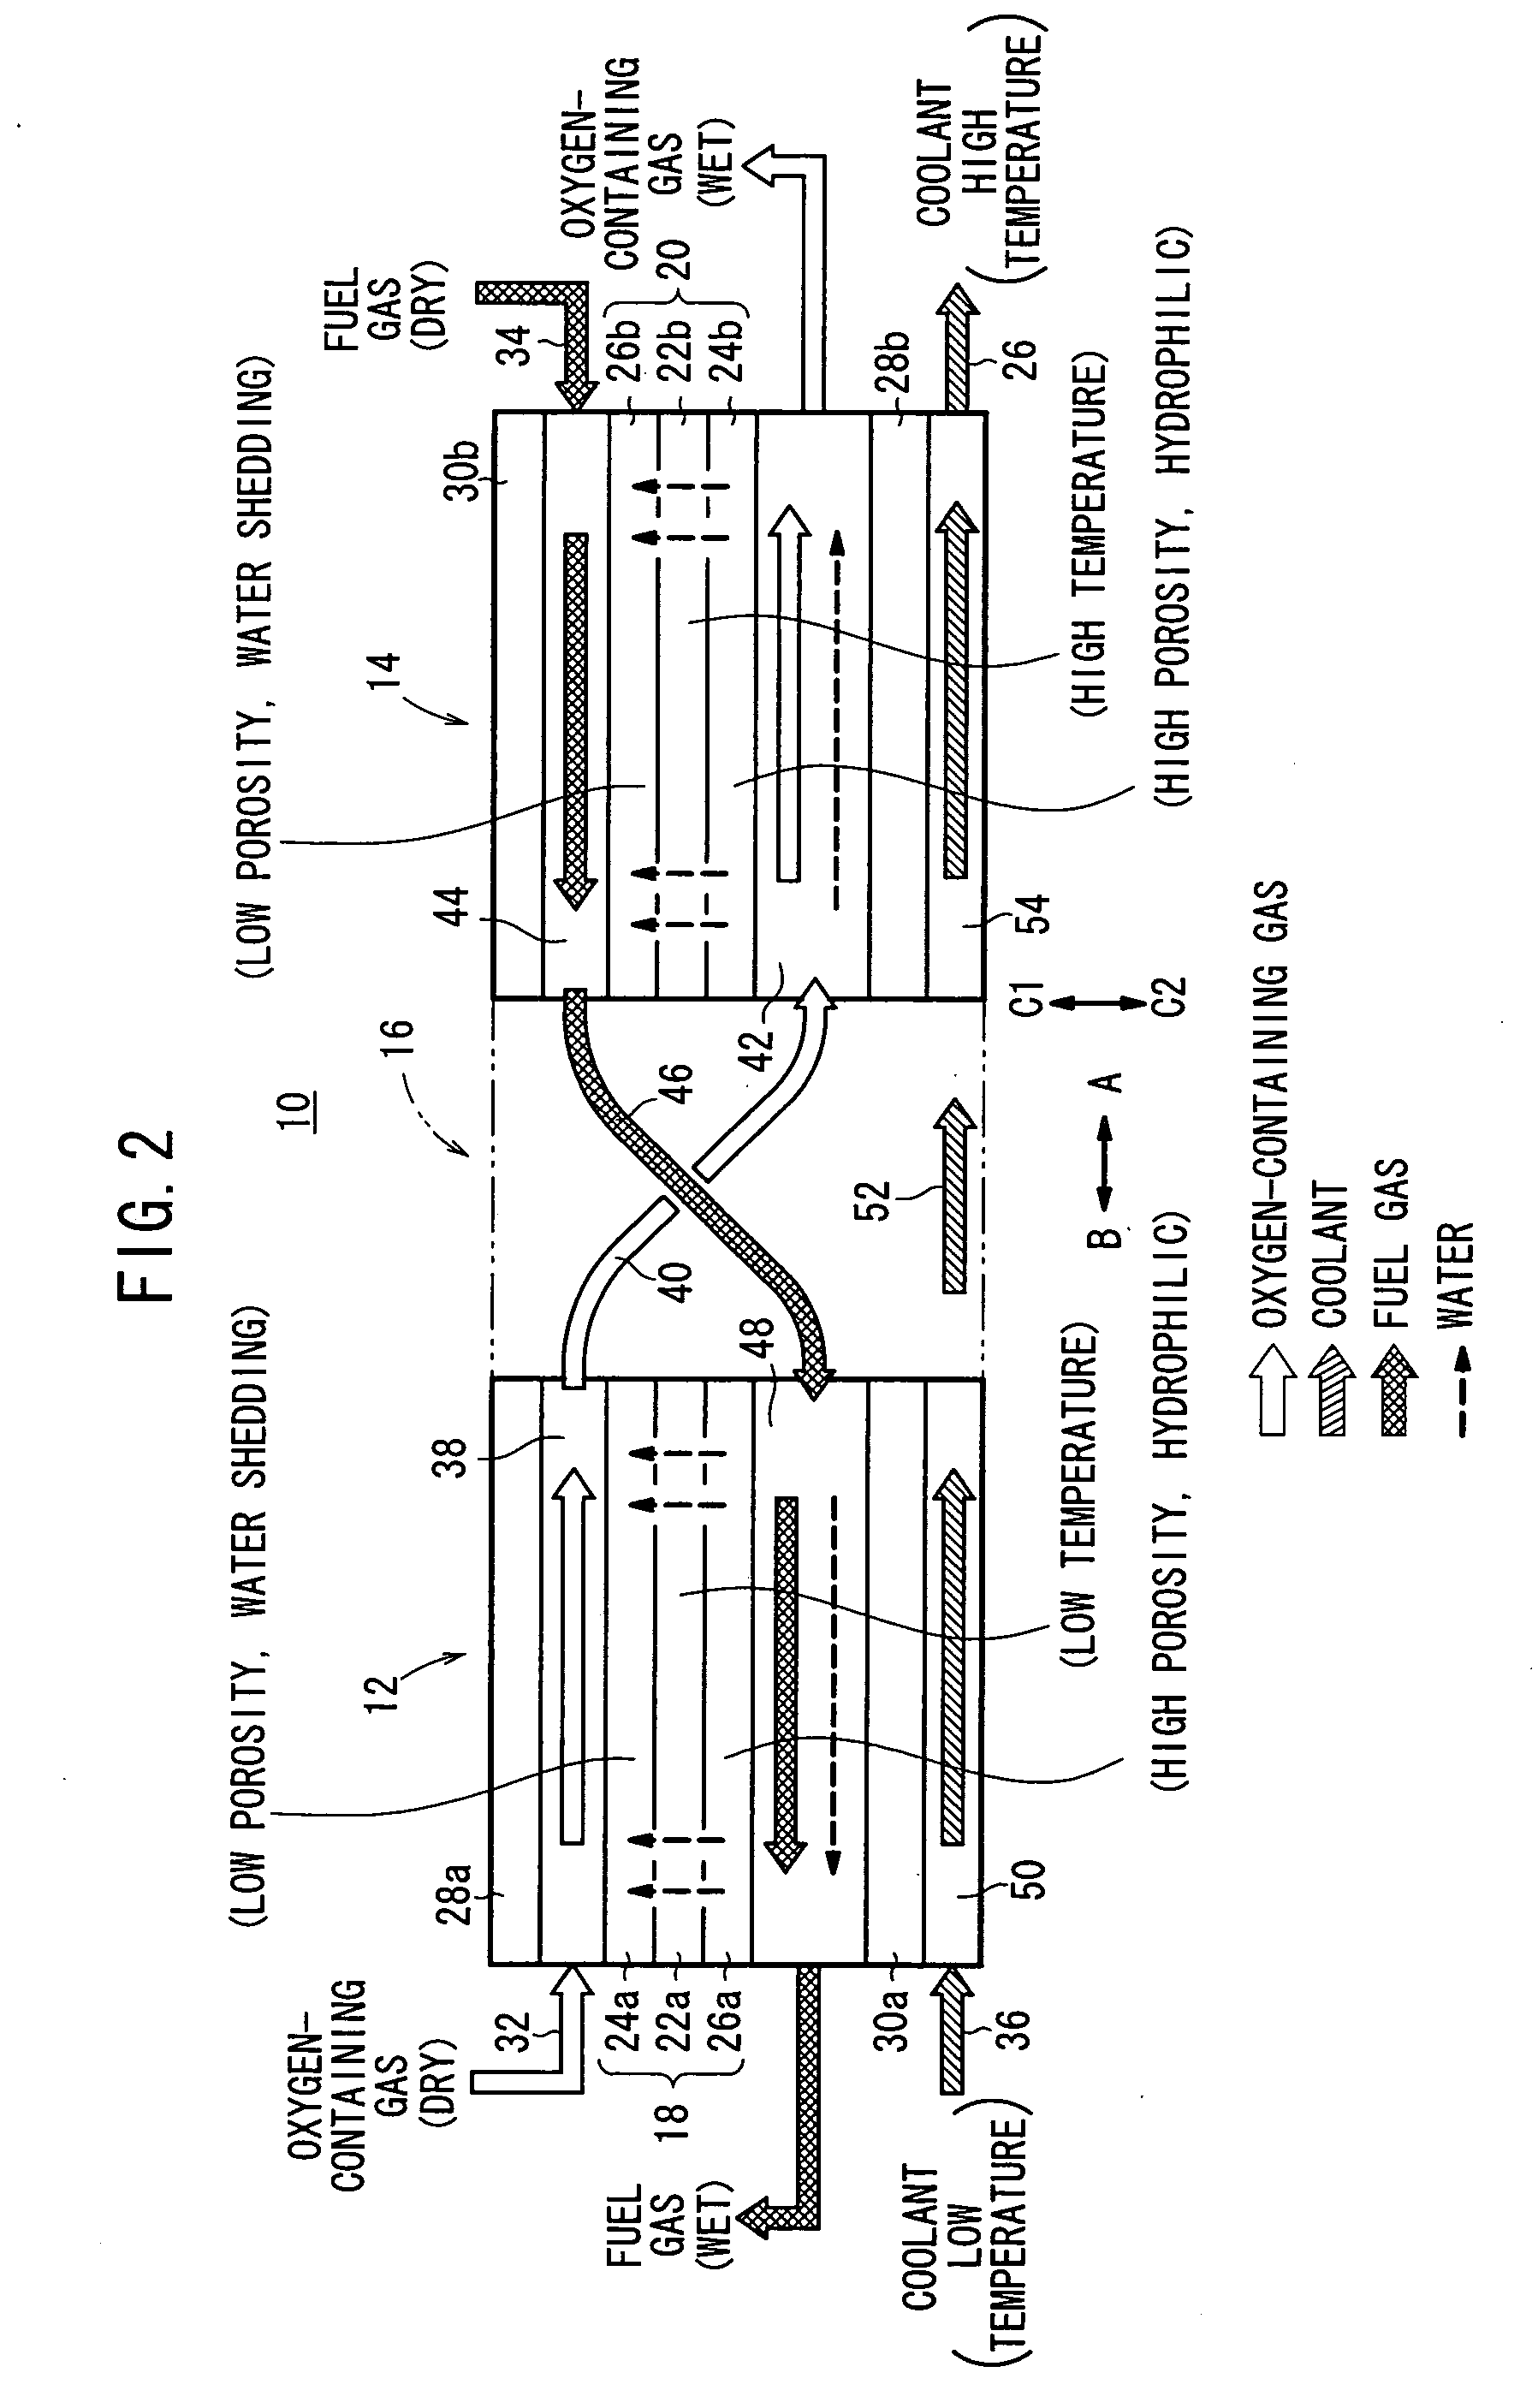 Solid high polymer type cell assembly